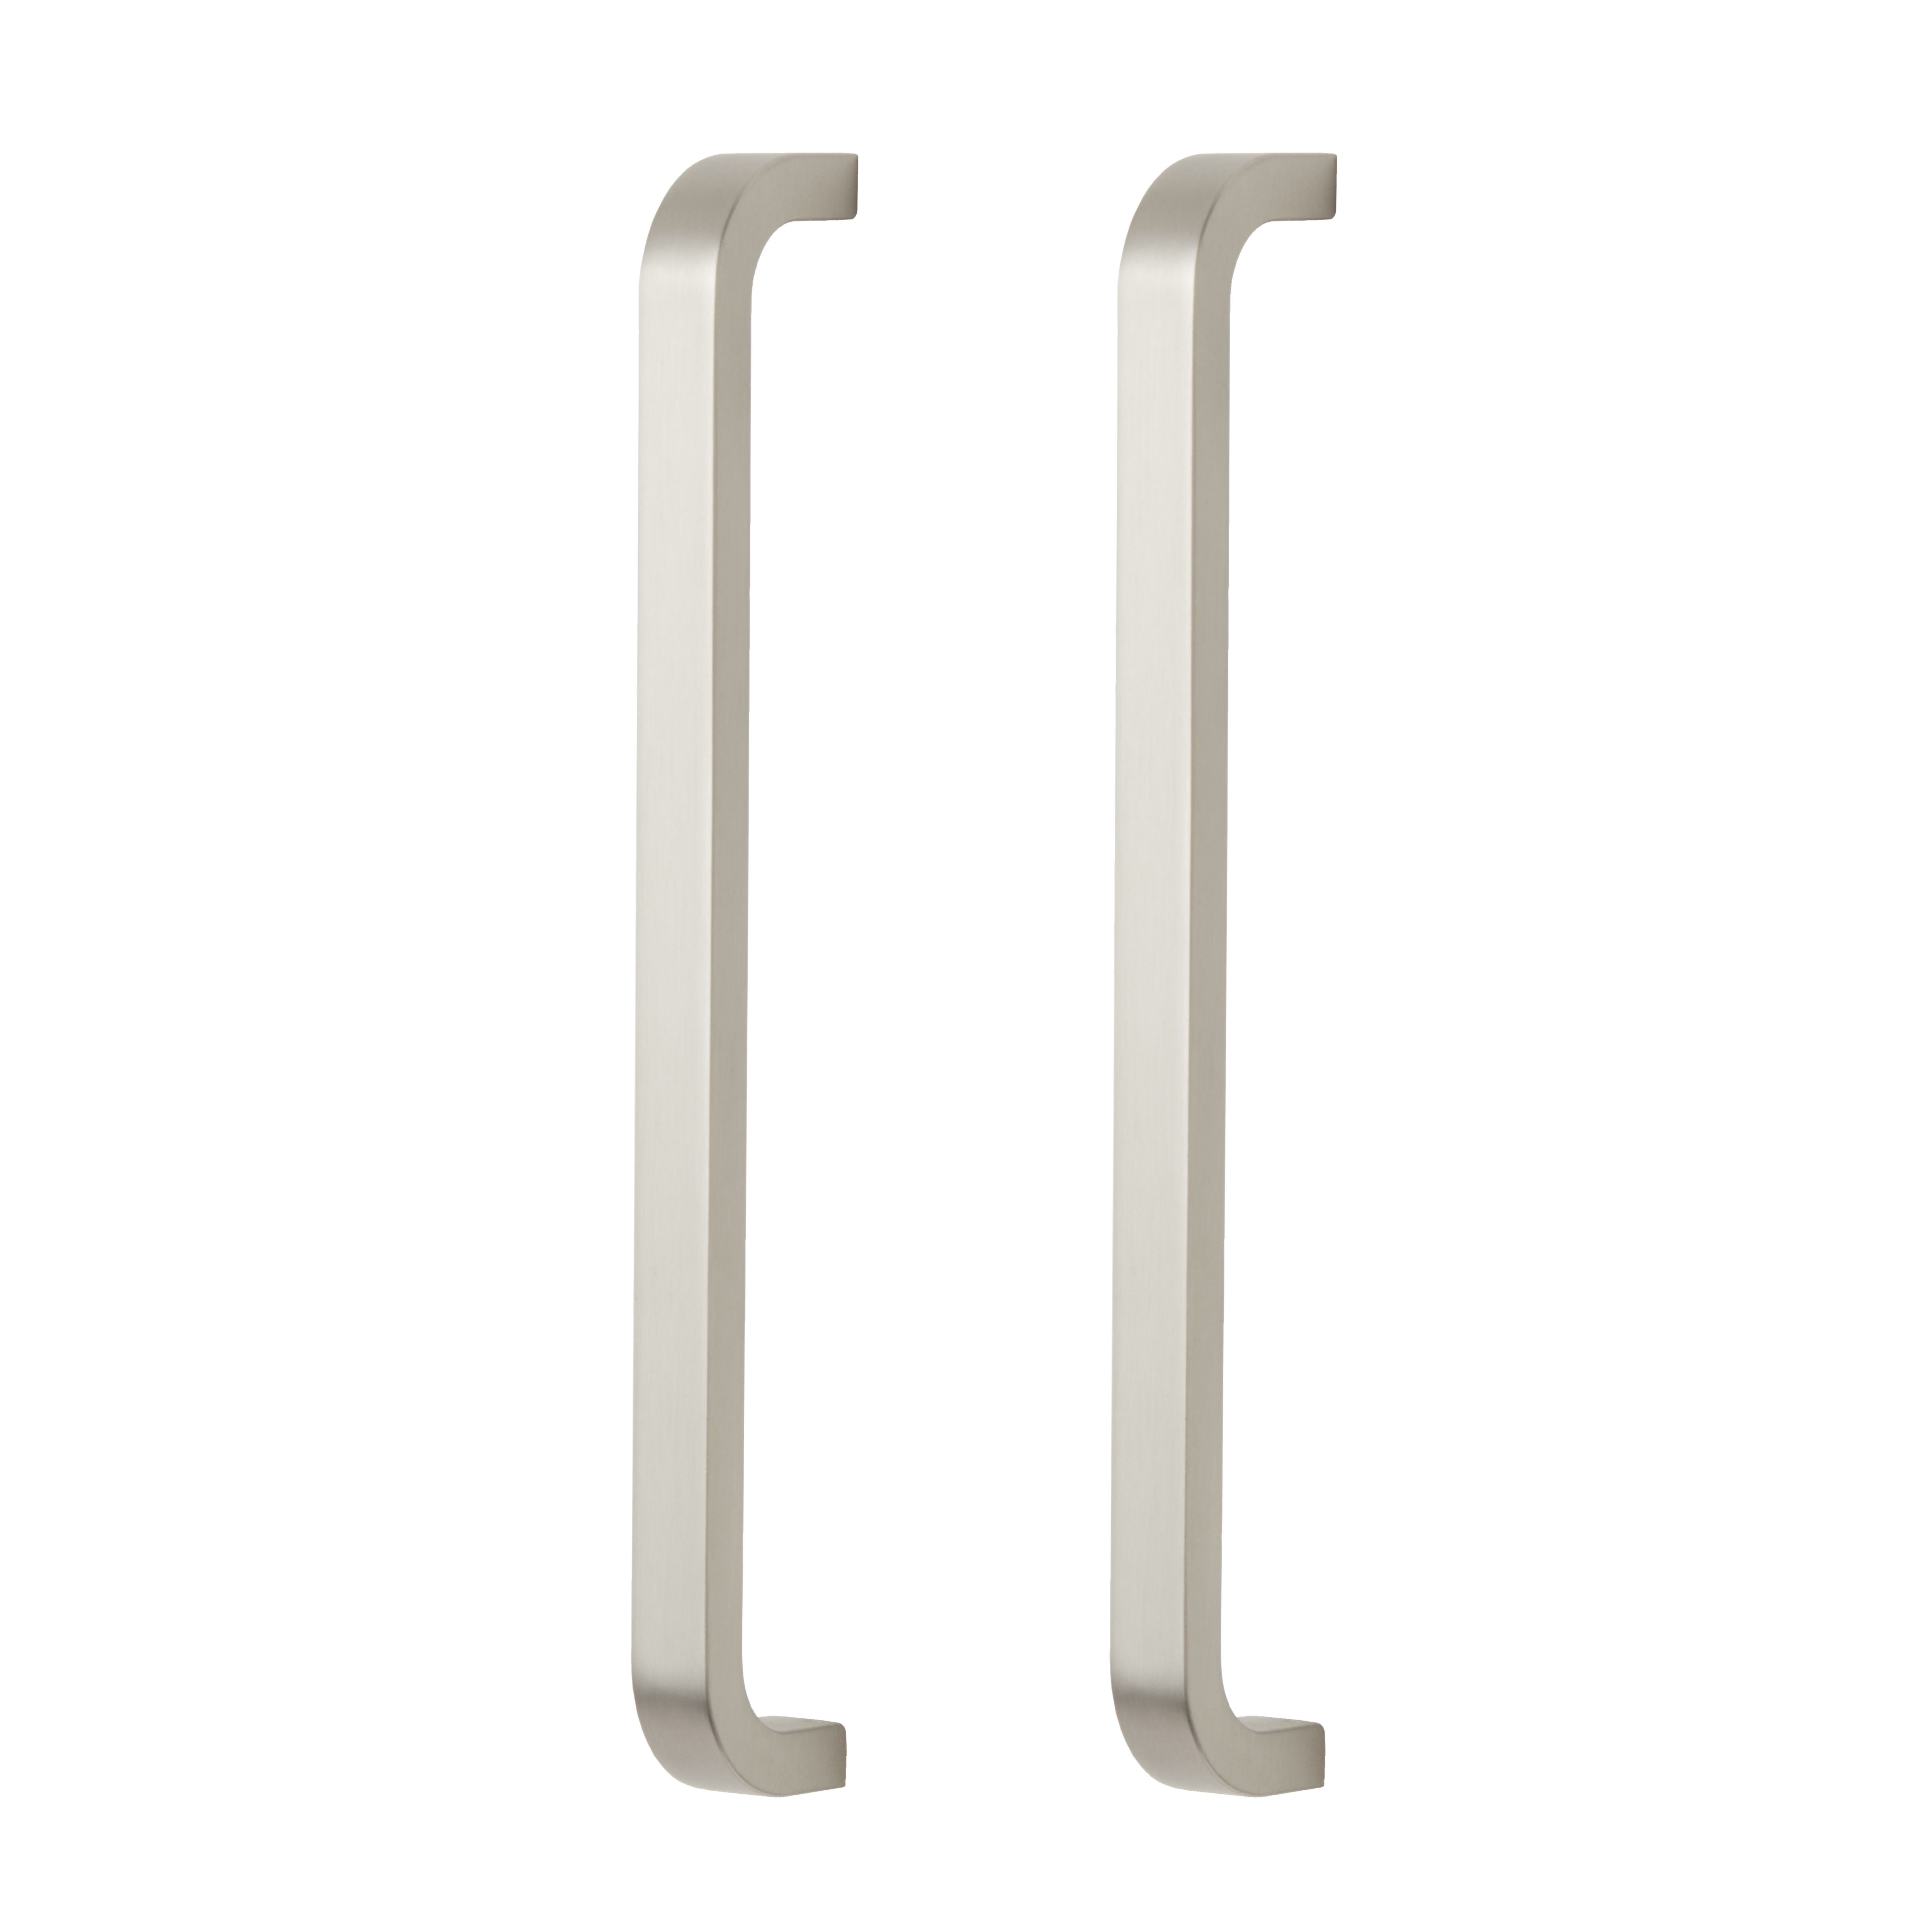 GoodHome Epazote Nickel effect Kitchen cabinets Handle (L)20cm, Pack of 2